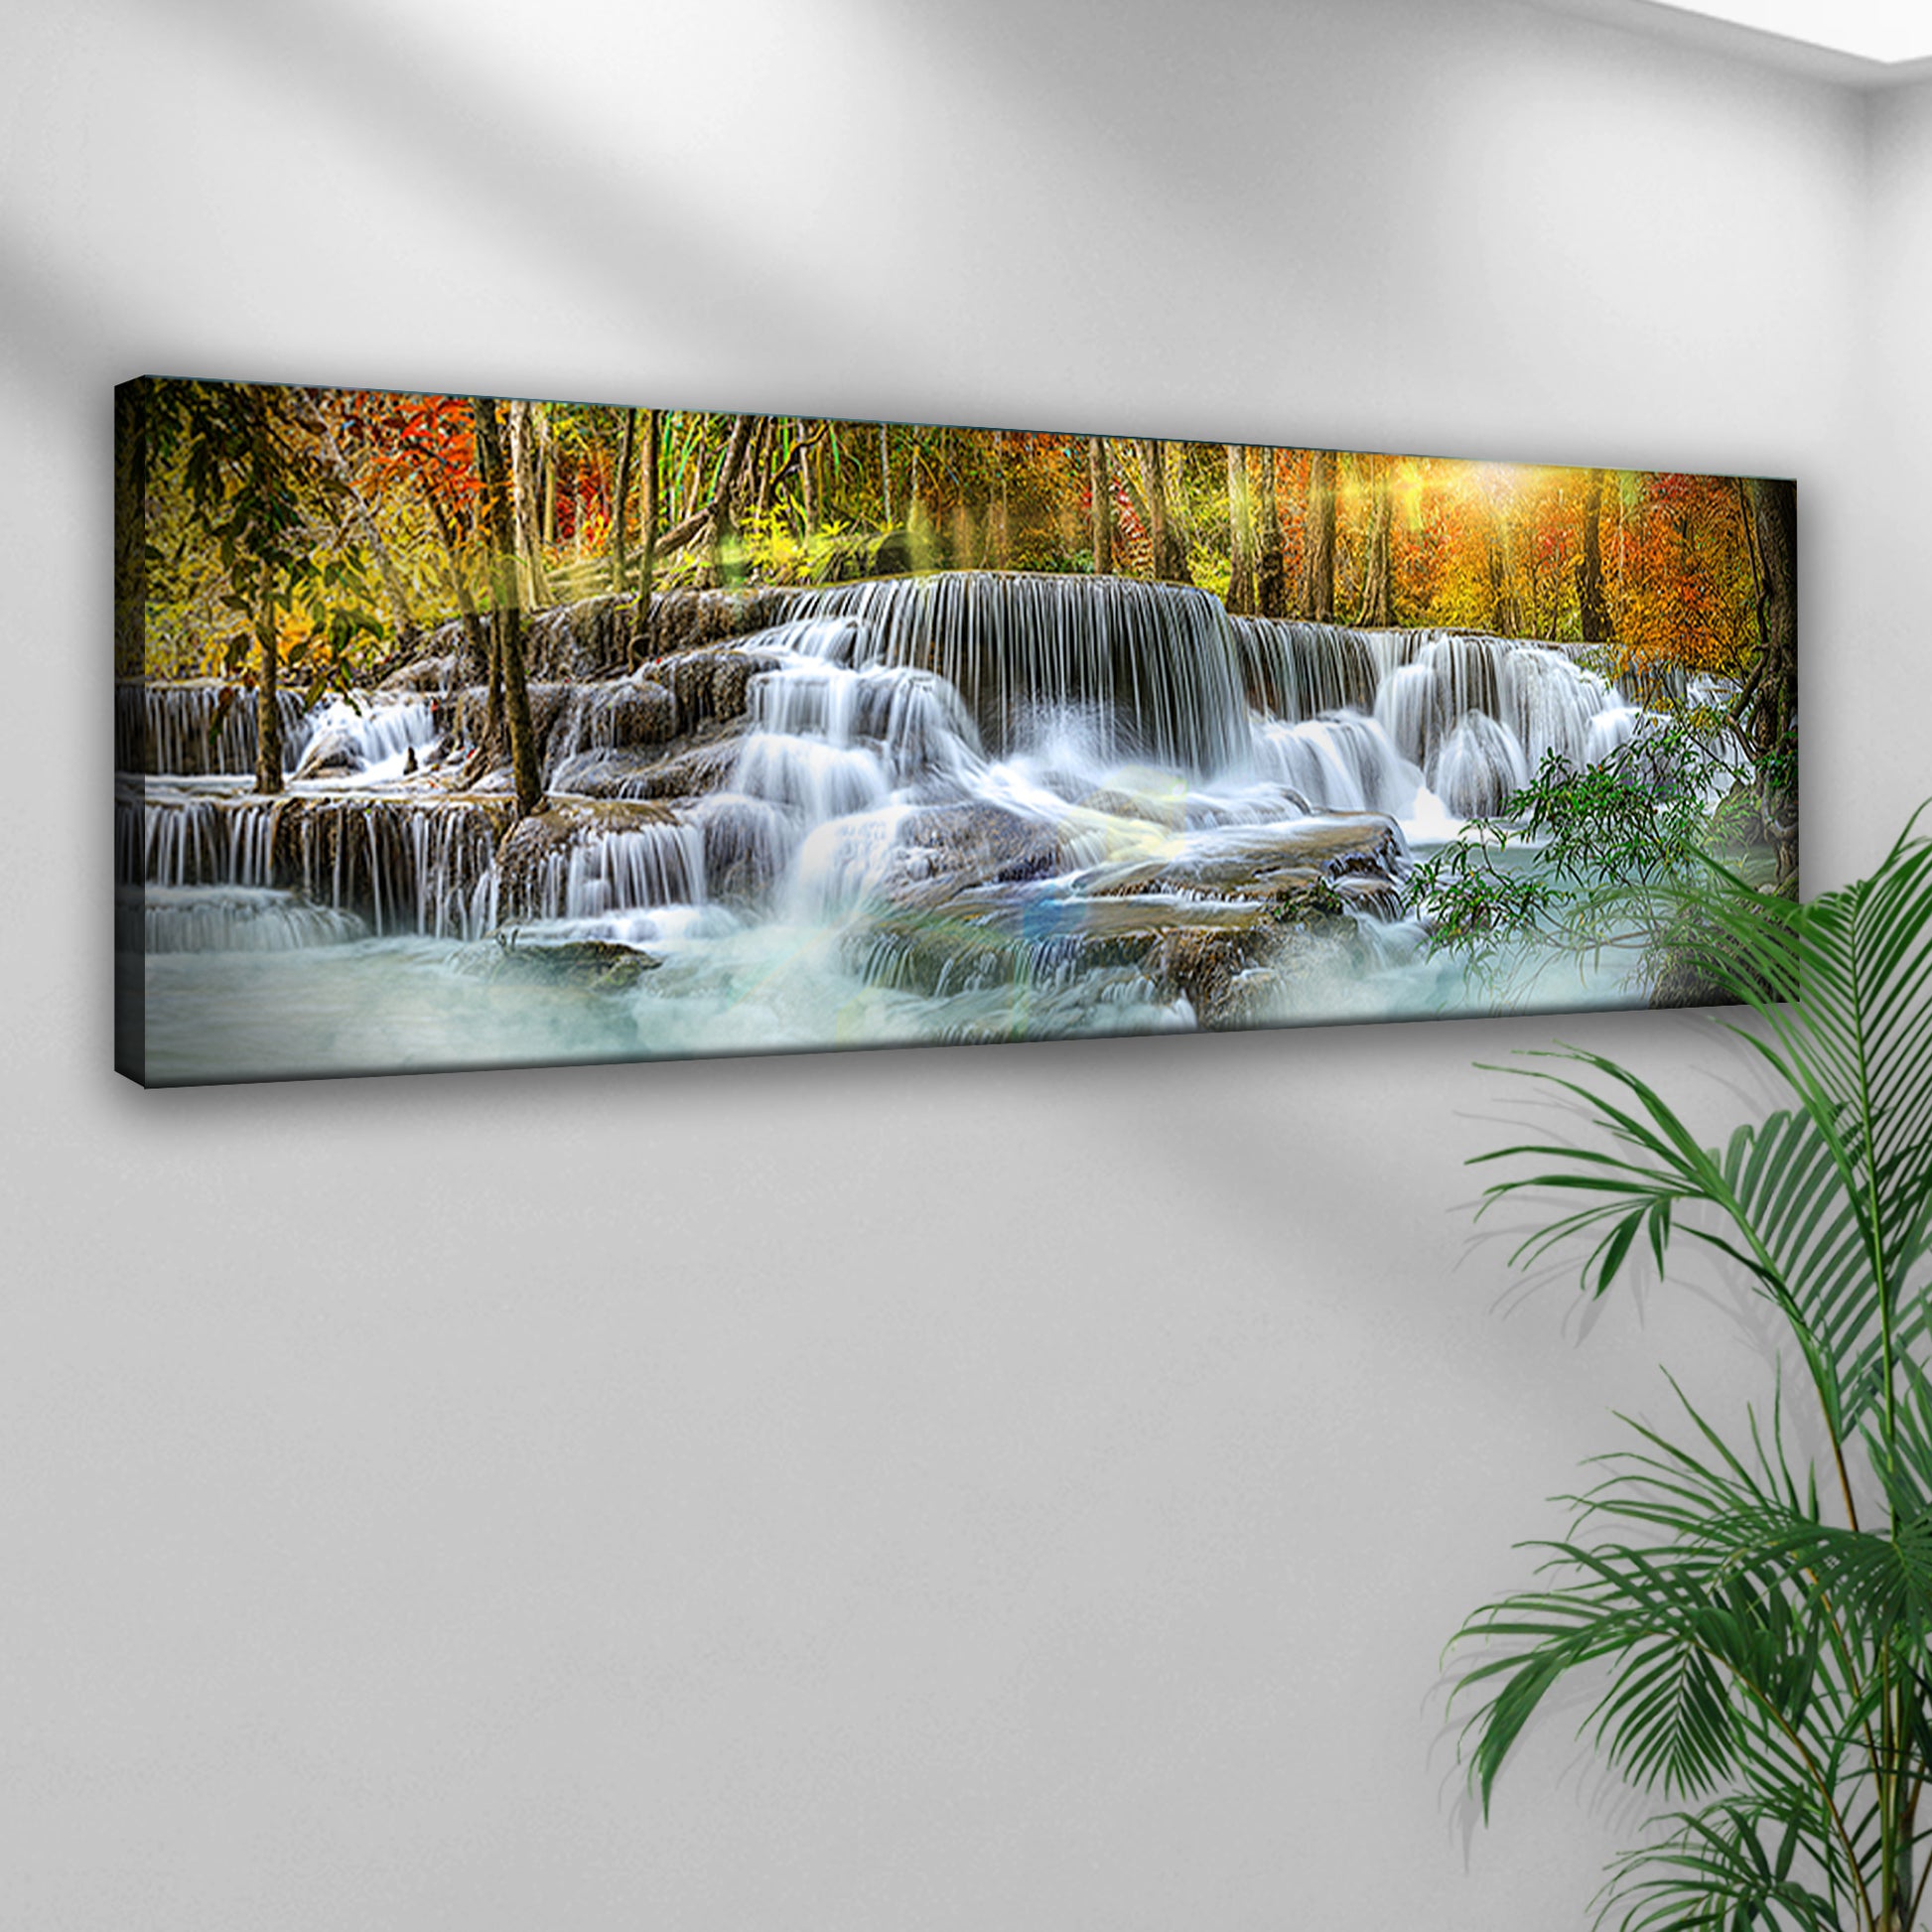 Waterfall In Forest River Canvas Wall Art - Image by Tailored Canvases